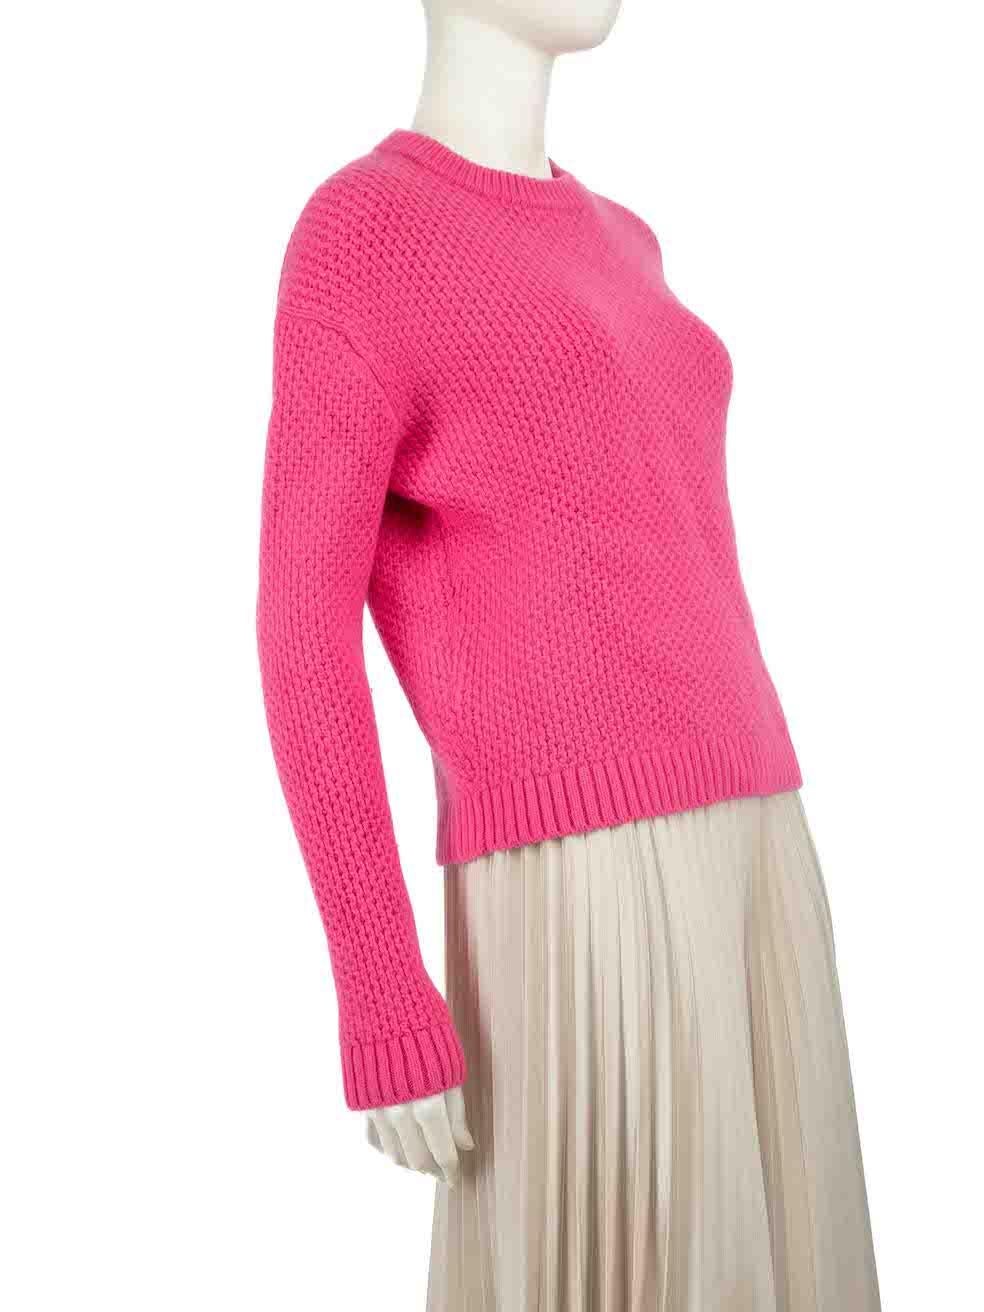 CONDITION is Very good. Hardly any visible wear to jumper is evident on this used Prada designer resale item.
 
 
 
 Details
 
 
 2019
 
 Pink
 
 Wool
 
 Knit jumper
 
 Long sleeves
 
 Round neck
 
 
 
 
 
 Made in Romaina
 
 
 
 Composition
 
 70%